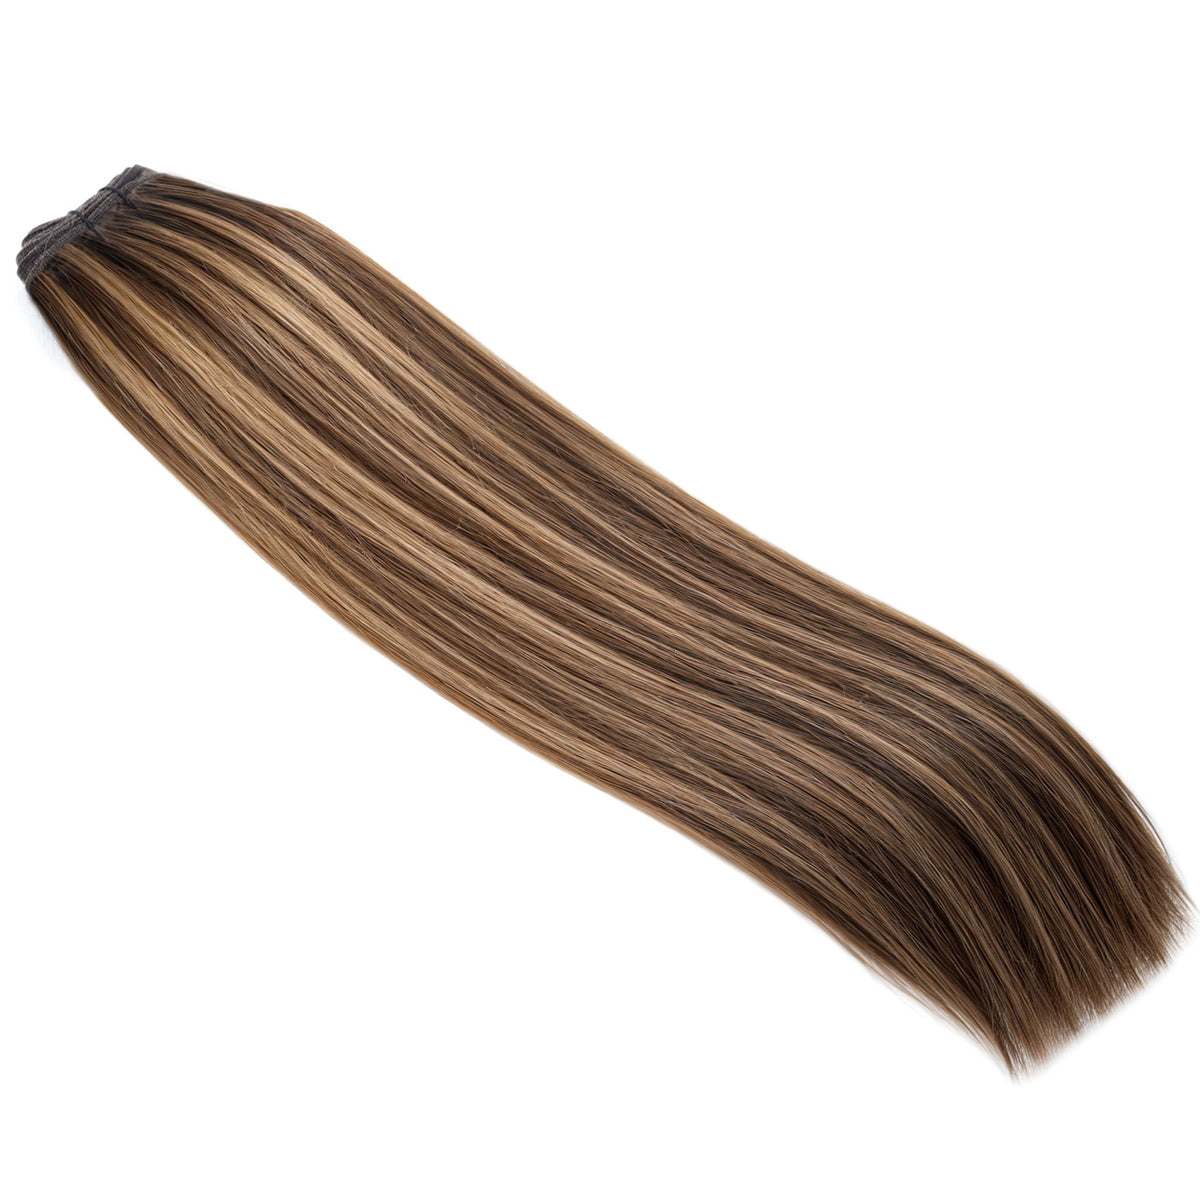 Sew In Hair Extensions USA